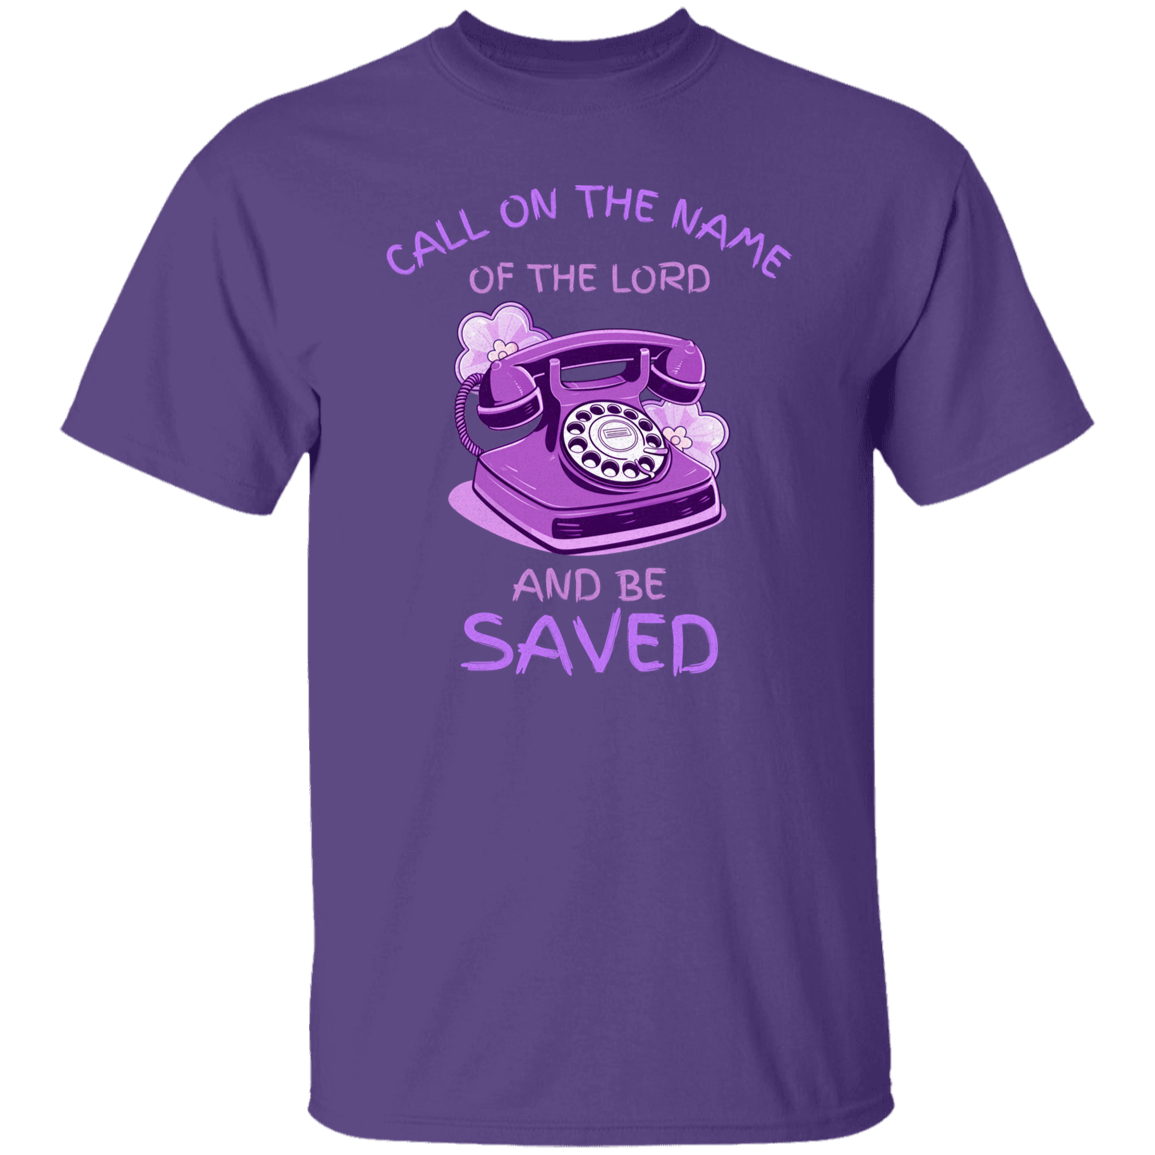 Call On the Name of the Lord T-Shirt